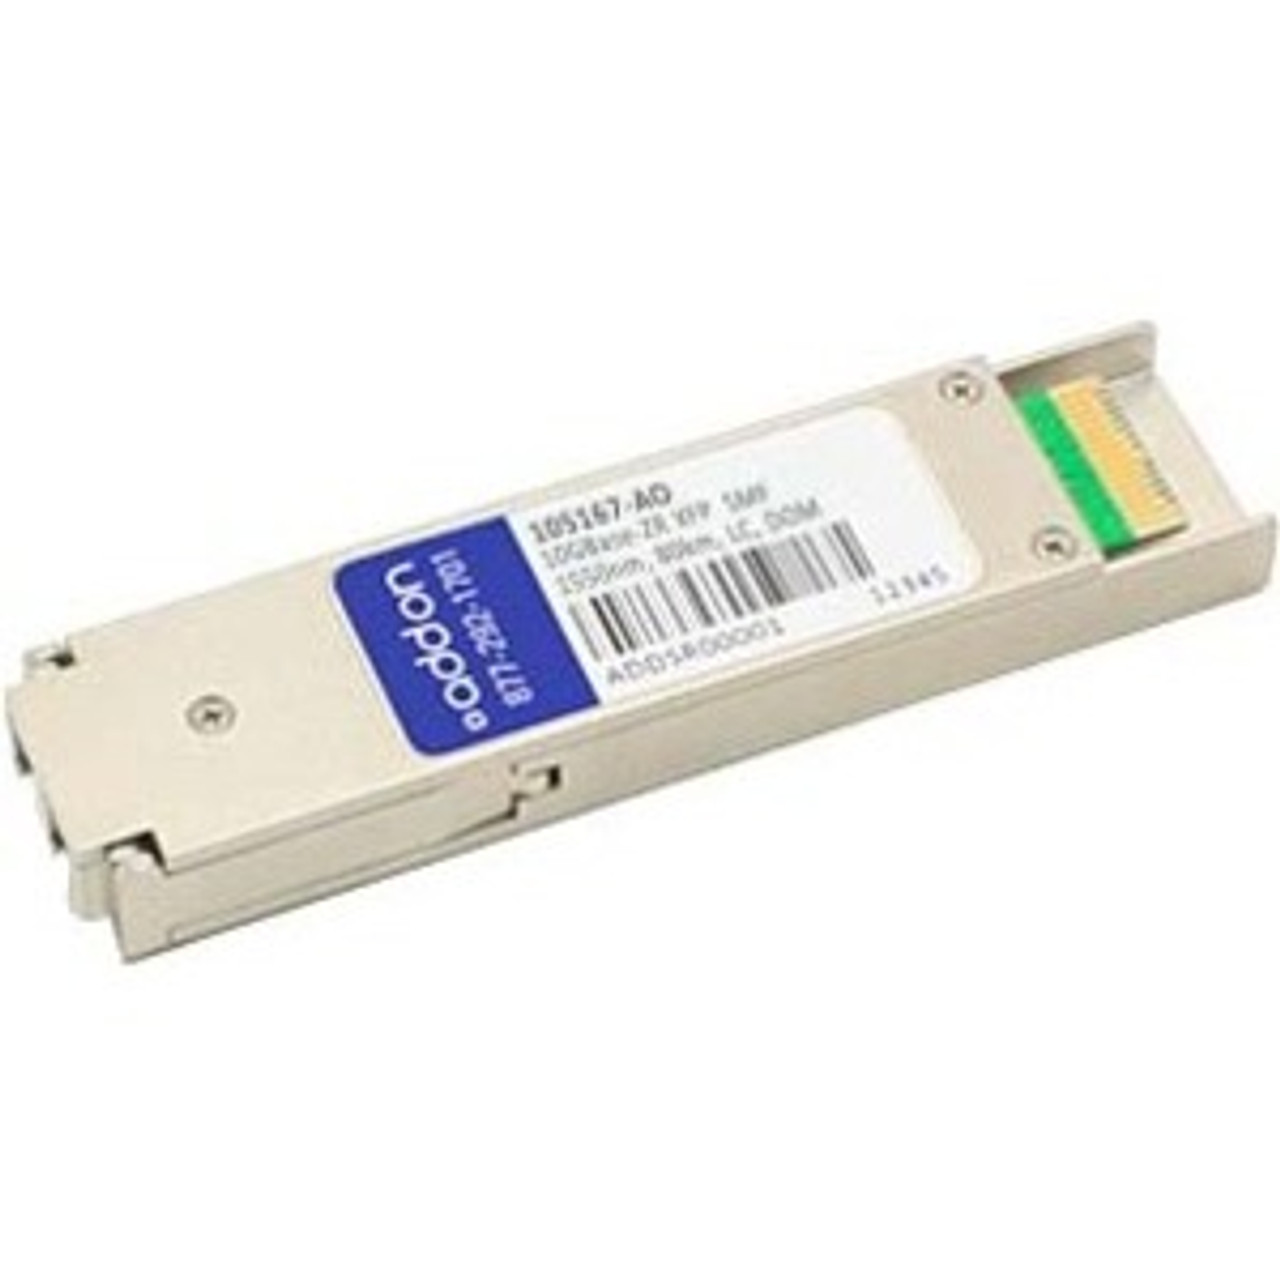 105167-ACC Accortec 10Gbps 10GBase-ZR Single-mode Fiber 80km 1550nm Duplex LC Connector XFP Transceiver Module for Calix Compatible